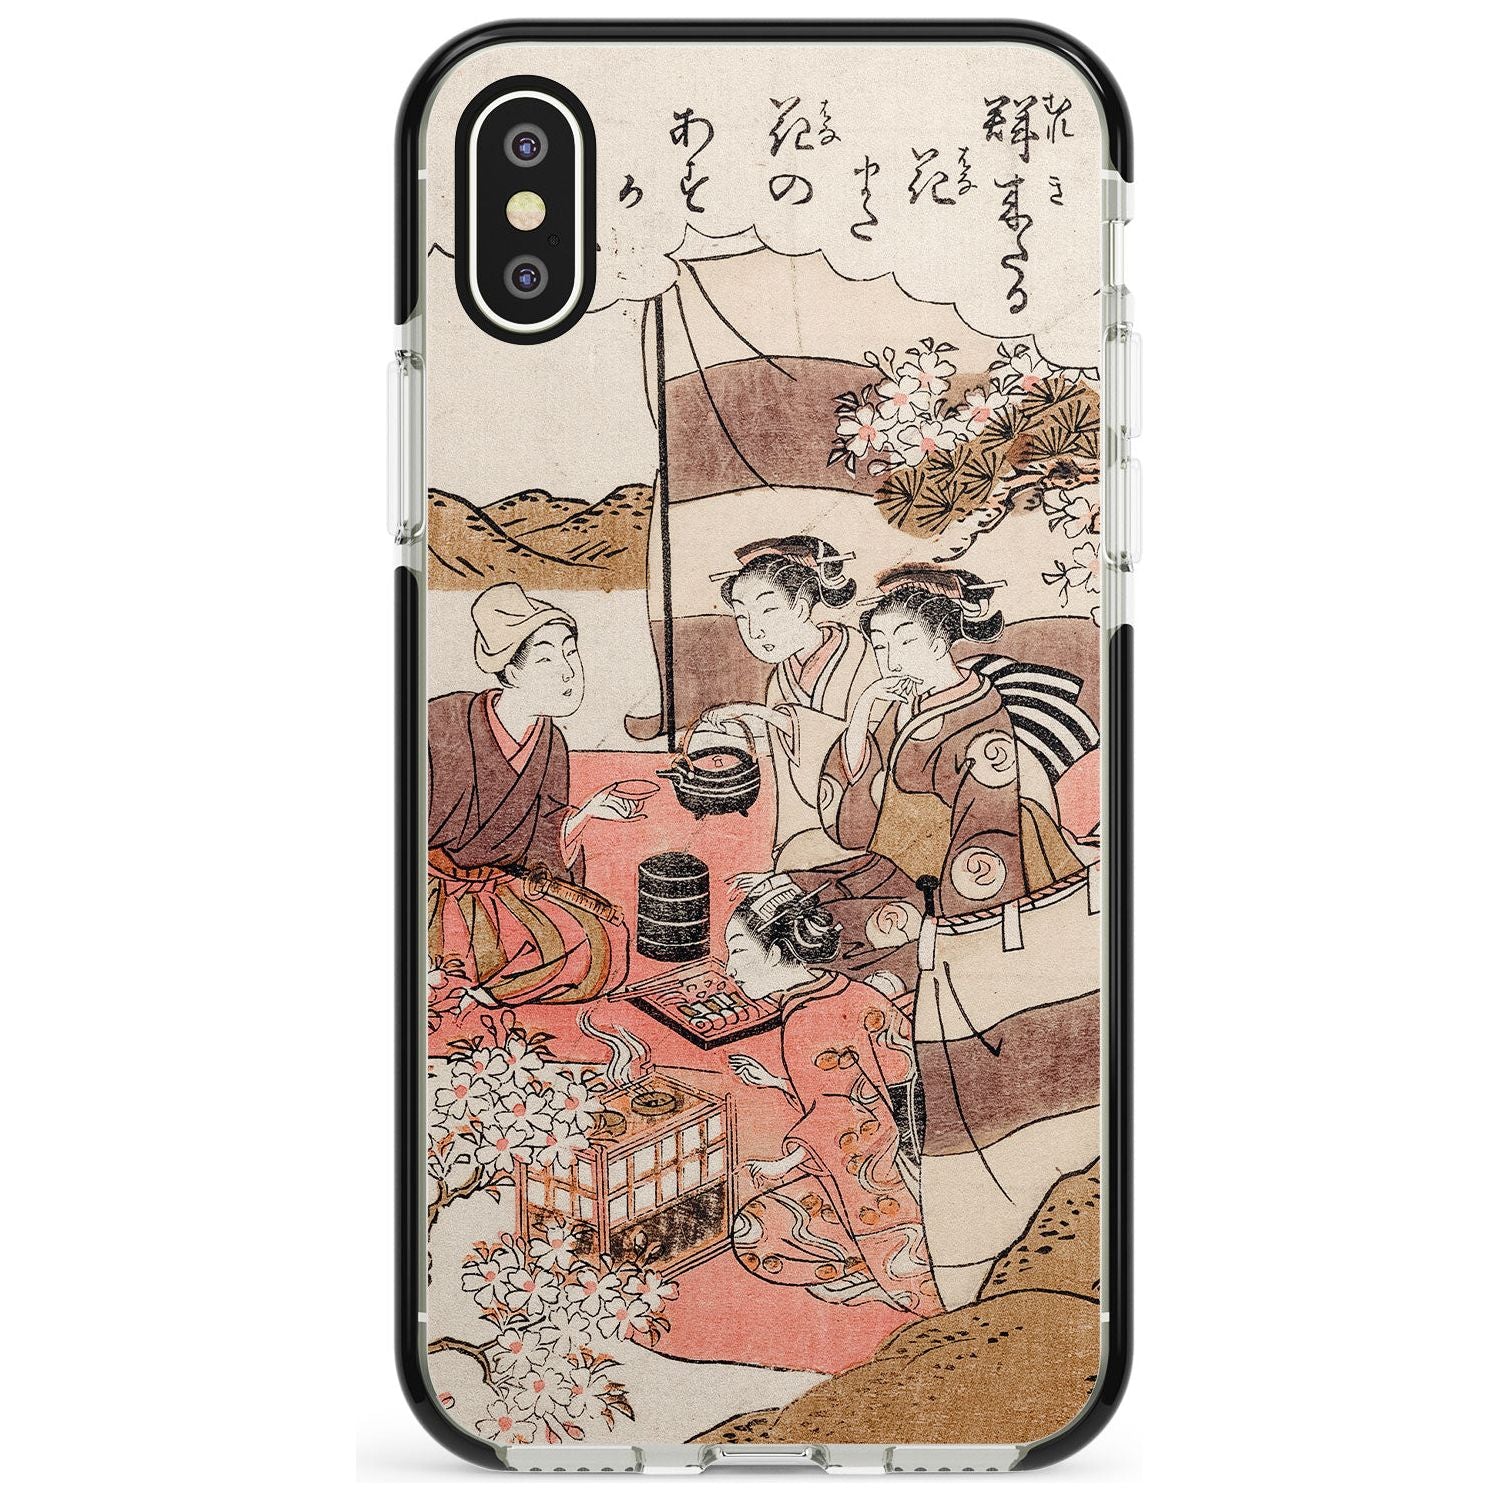 Japanese Afternoon Tea Black Impact Phone Case for iPhone X XS Max XR